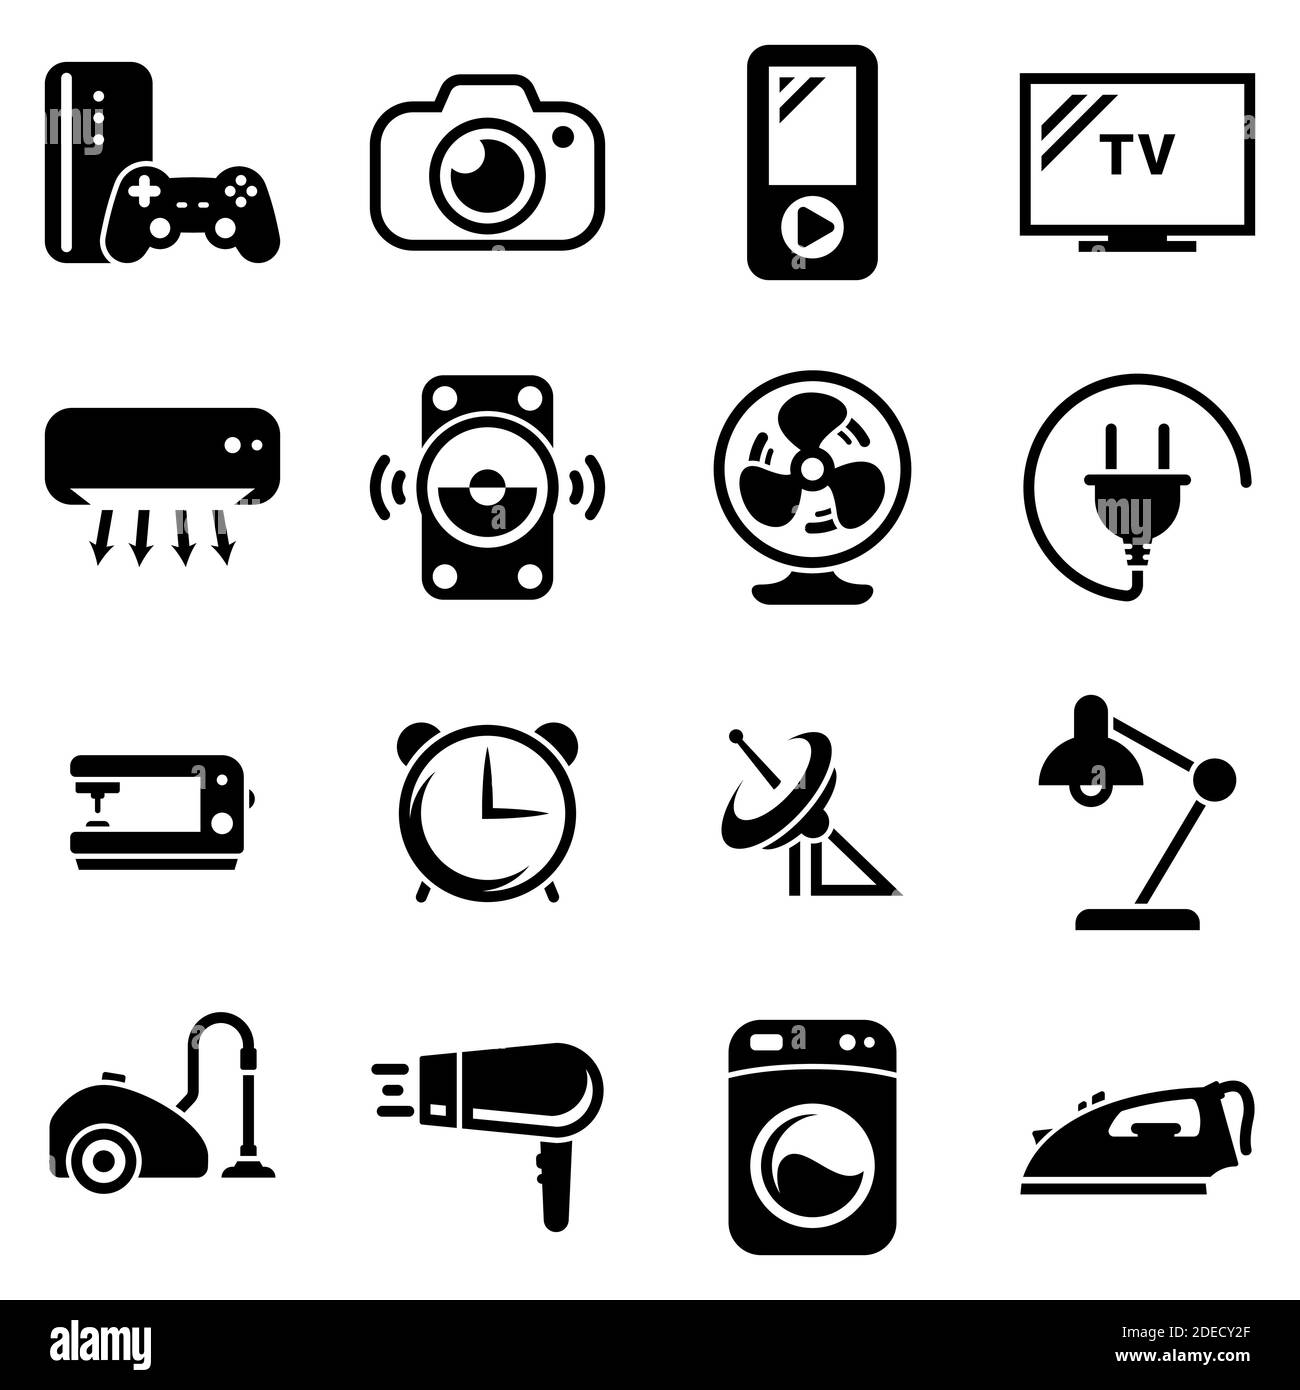 Set of simple icons on a theme Home, home appliances, household, vector, design, collection, flat, sign, symbol,element, object, illustration. Black i Stock Vector